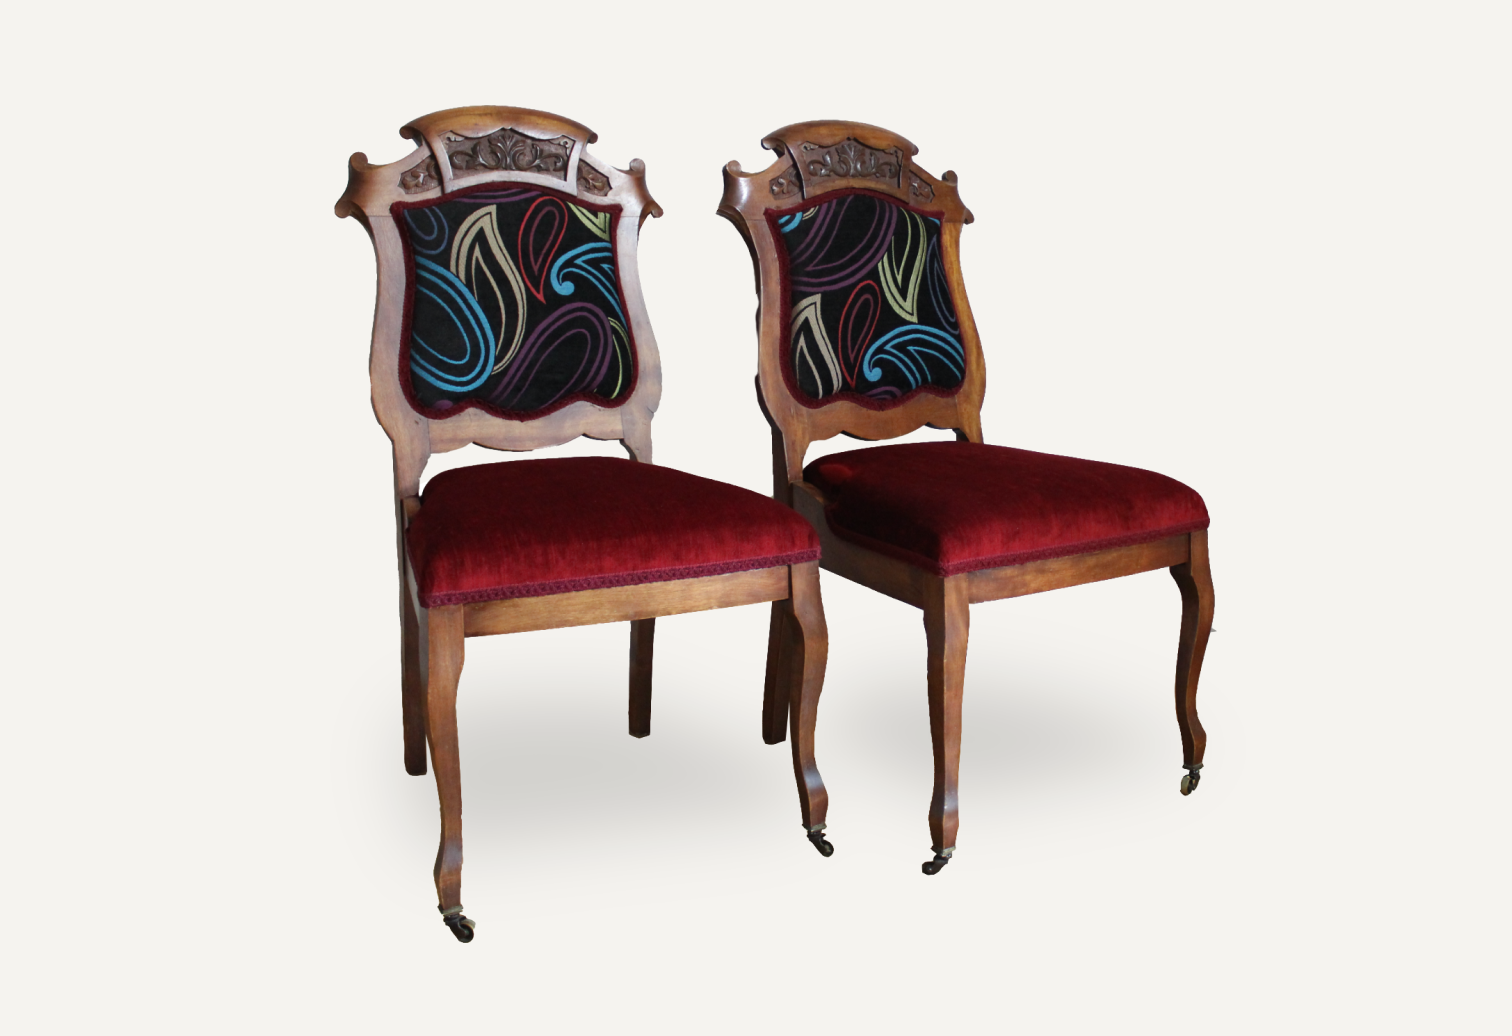 reupholstery two antique wood and velvet chairs